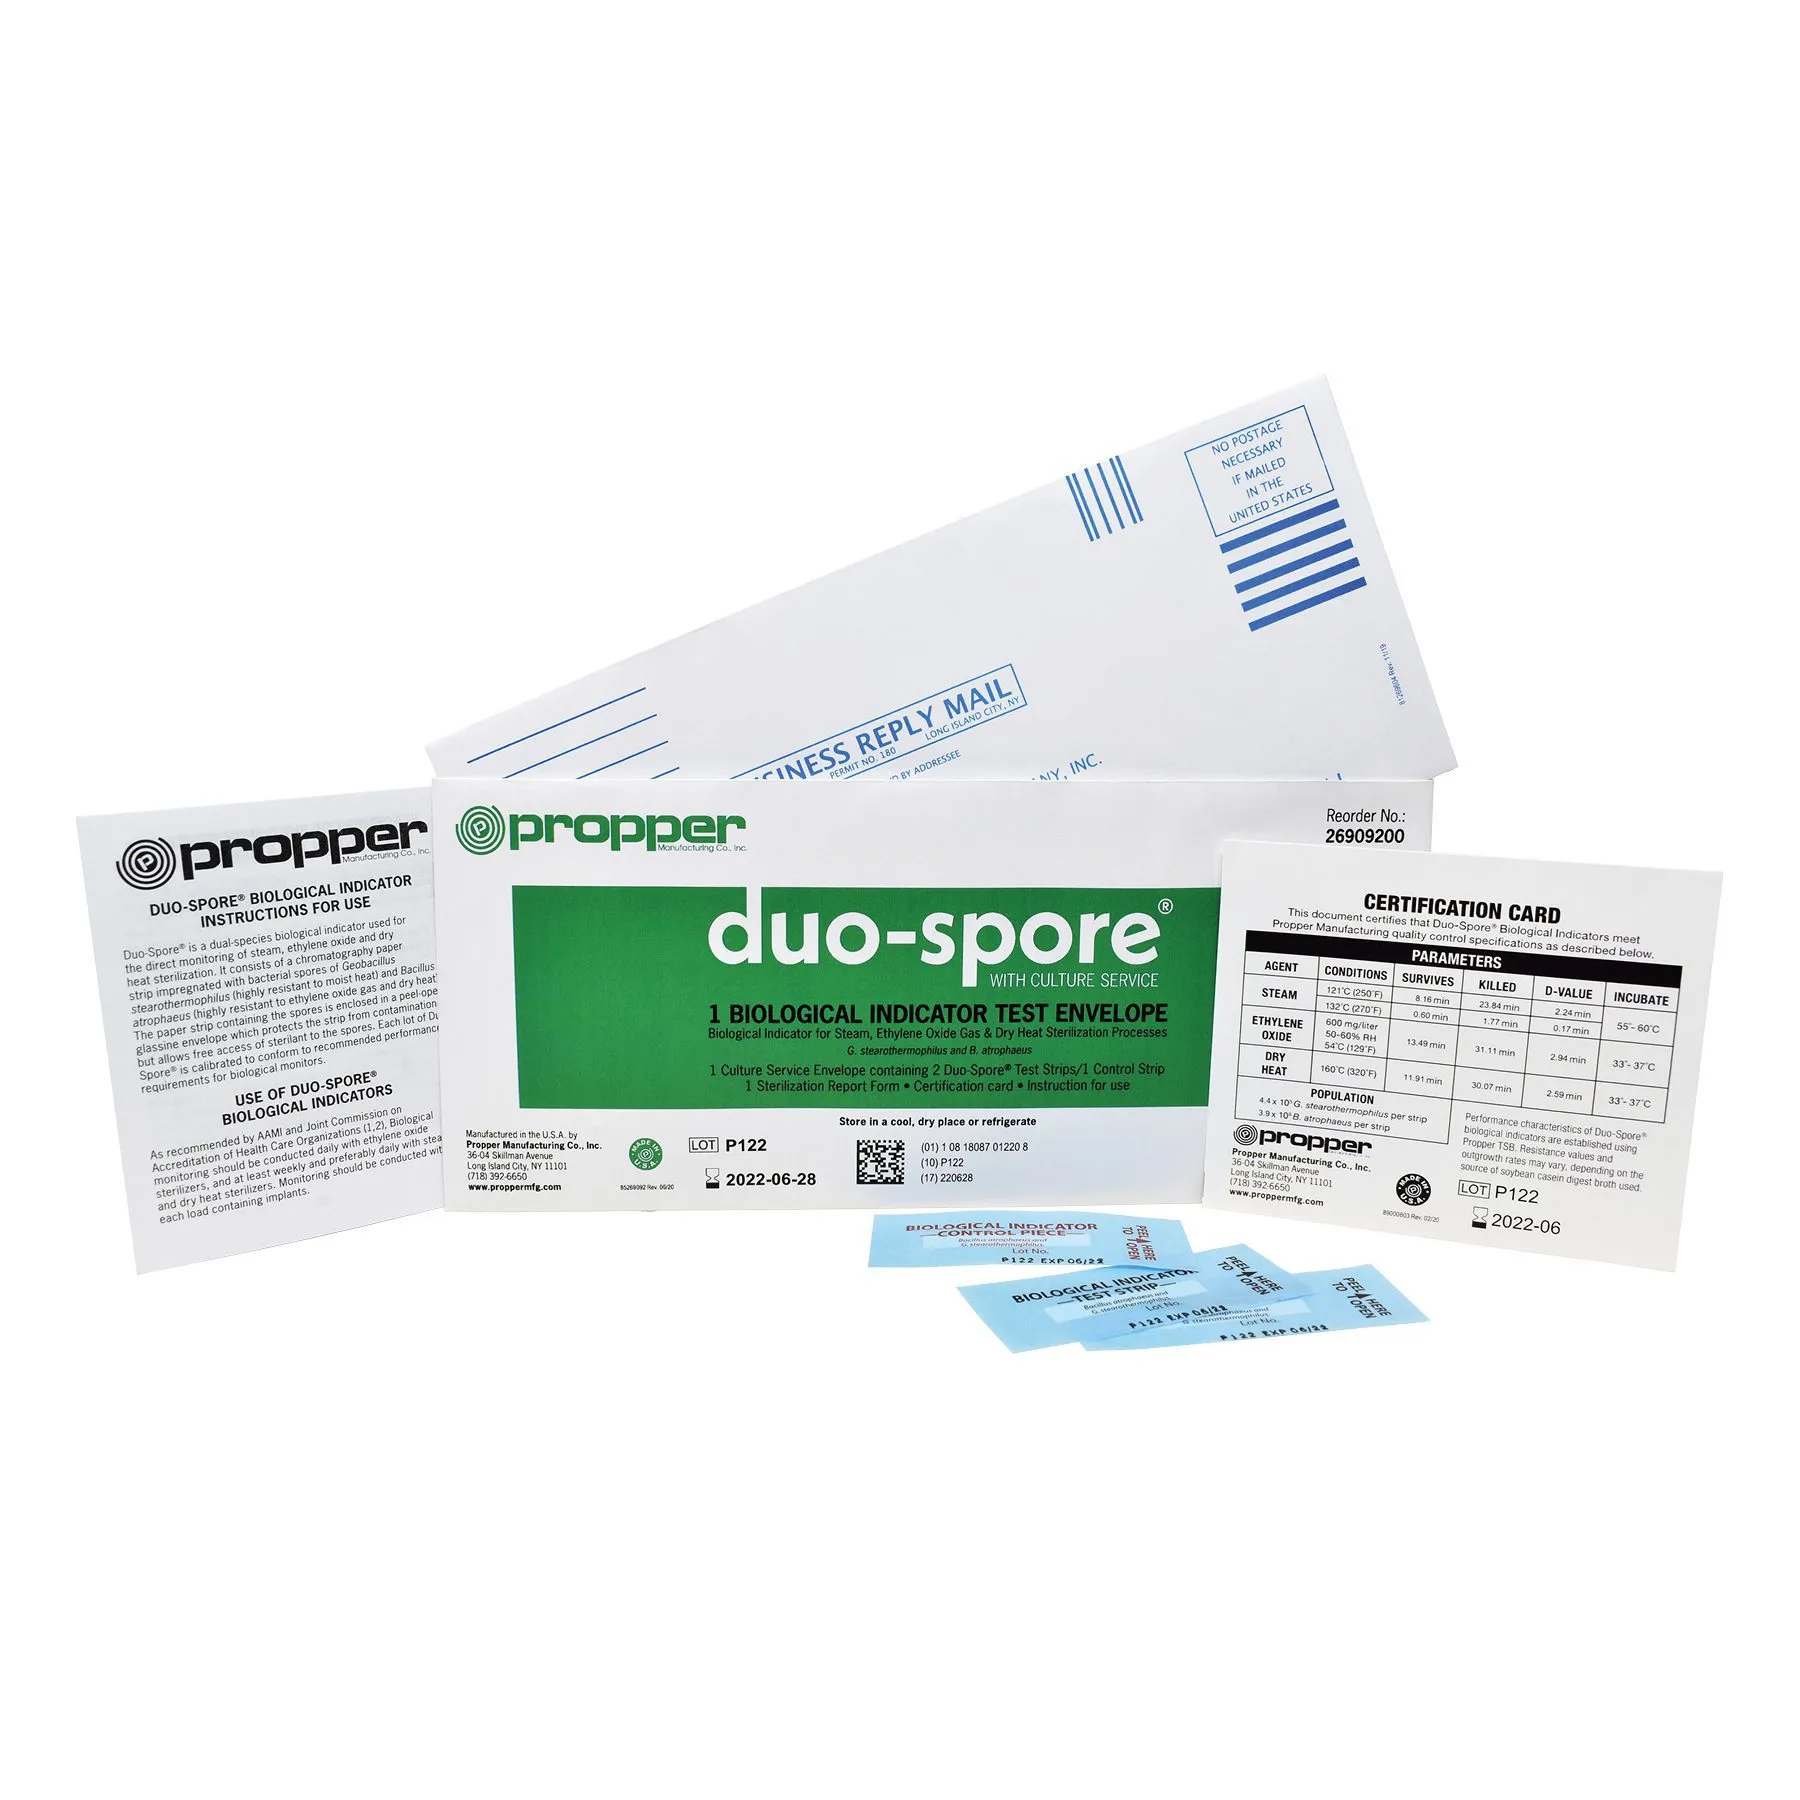 Propper - From: 26909500 To: 26910600 - Manufacturing Duo Spore Biological Indicator Tests